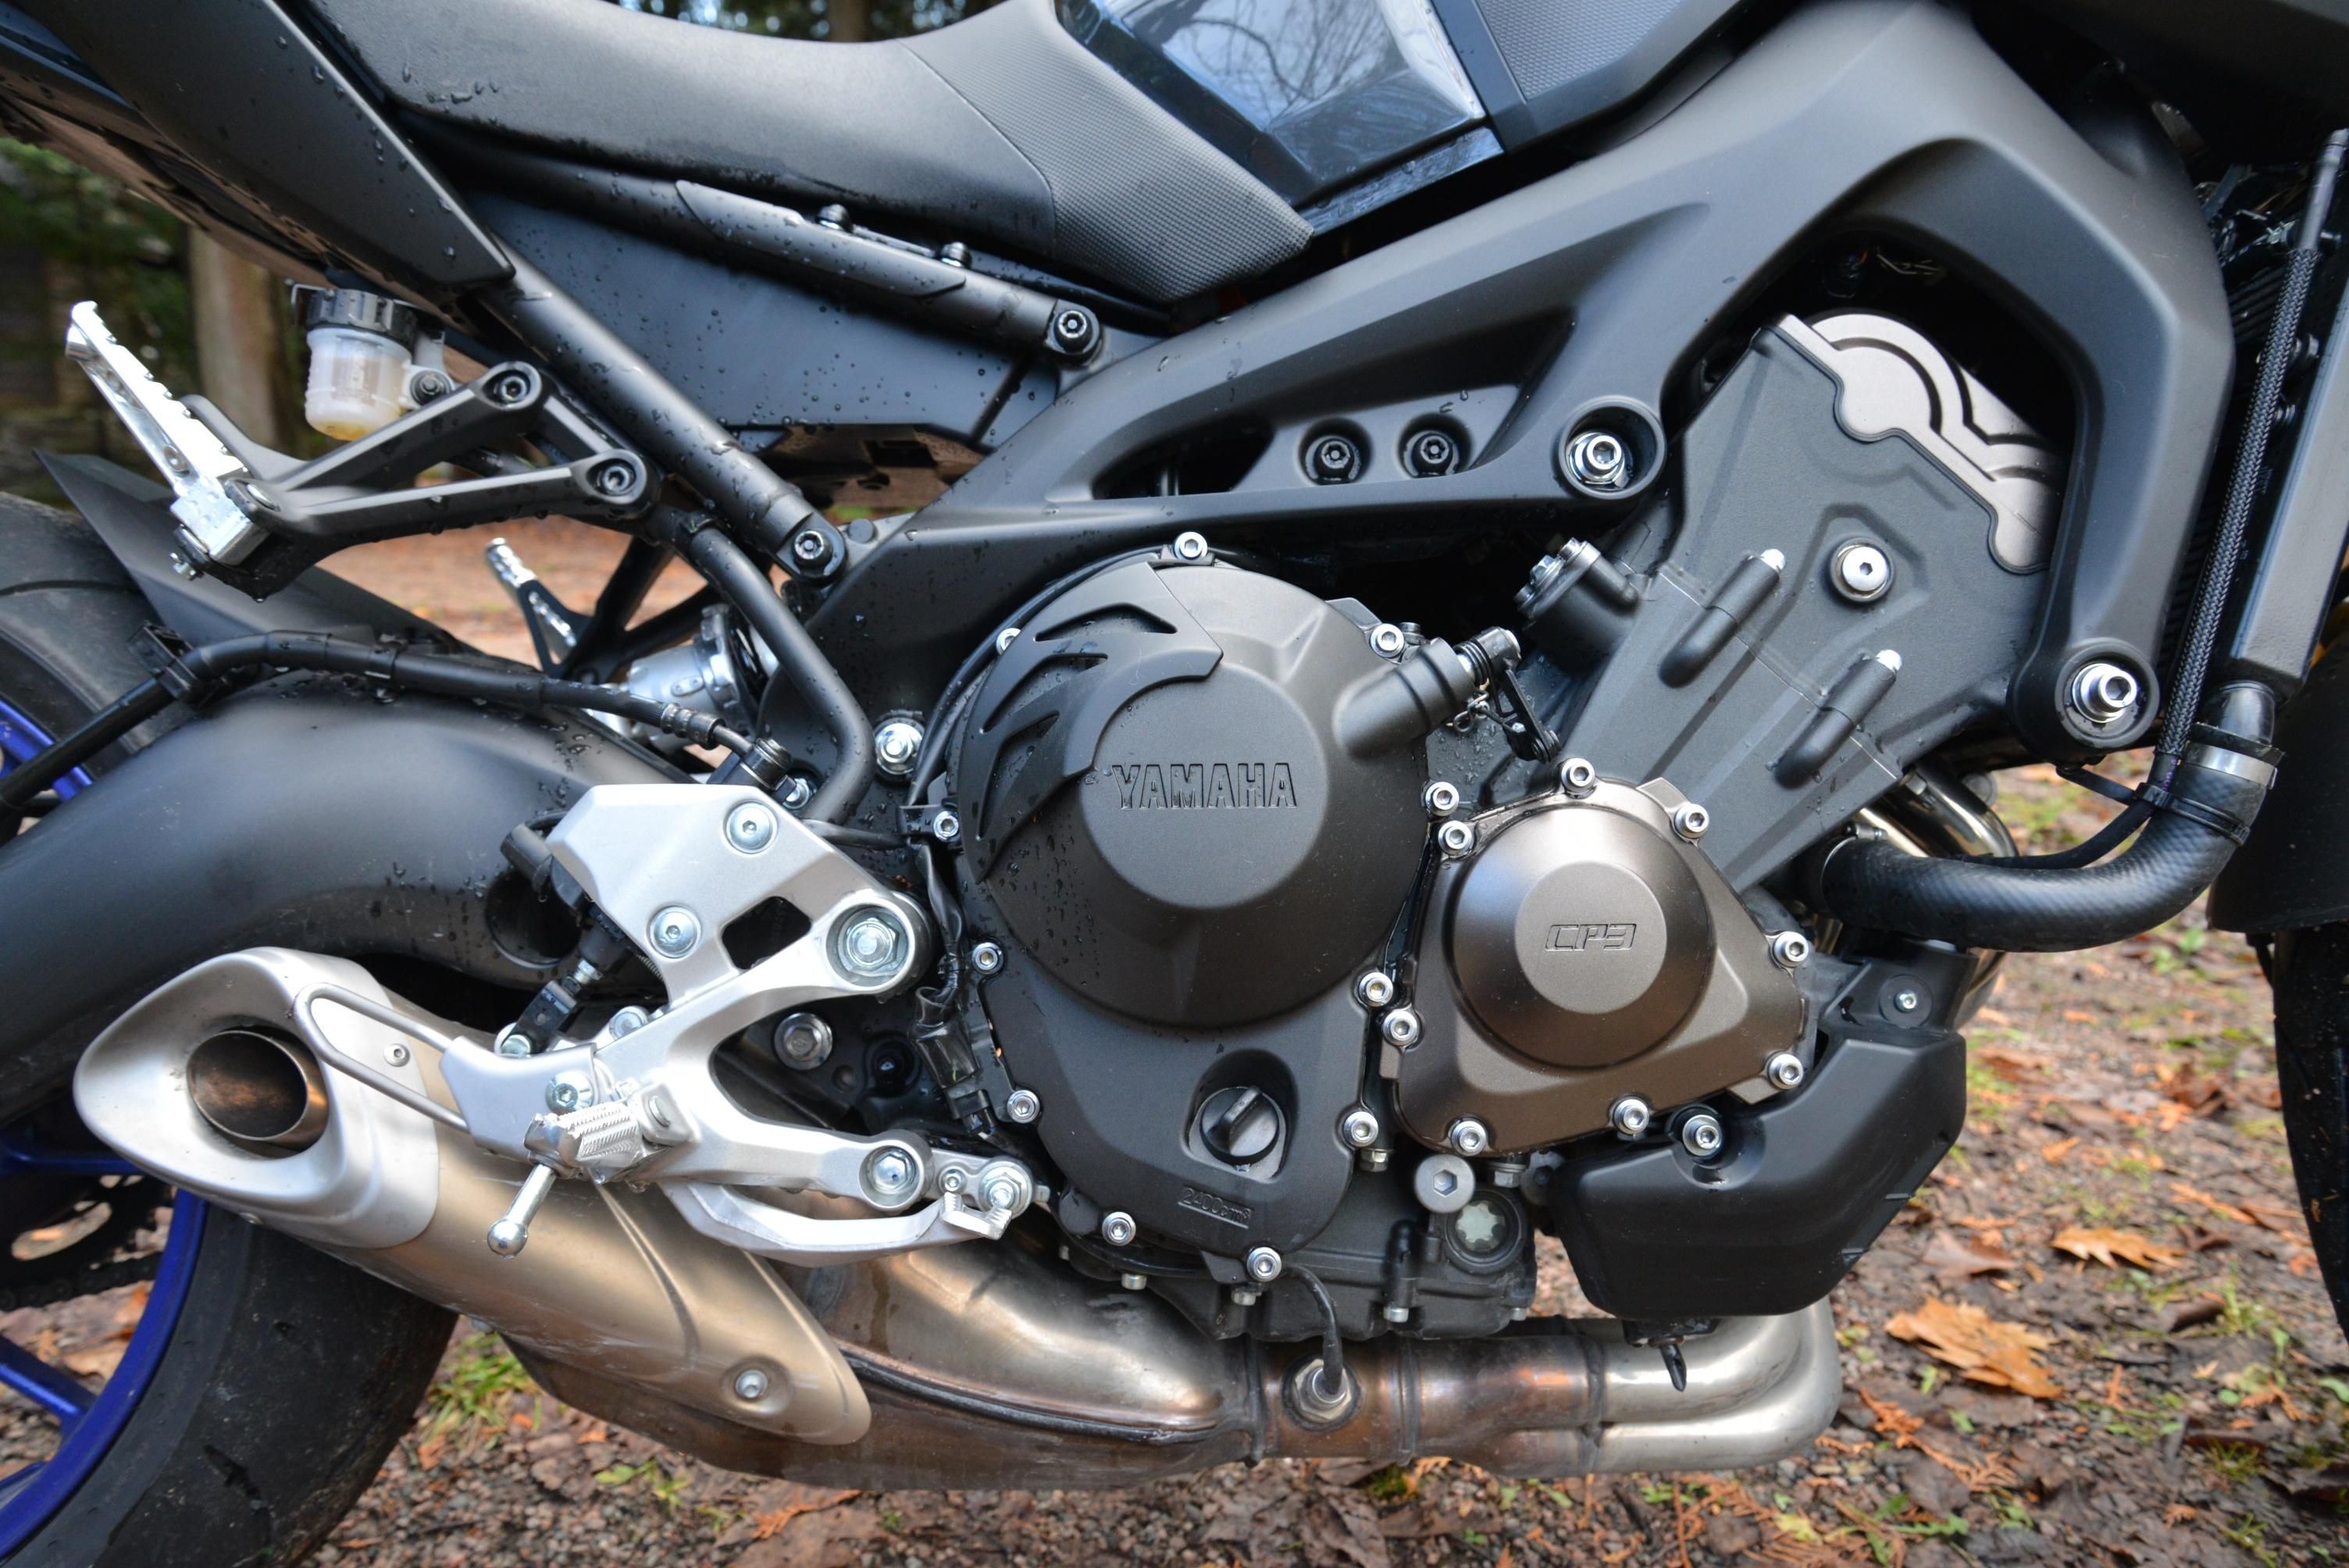 The FZ09 847cc Triple engine - expect to see quite a few of these